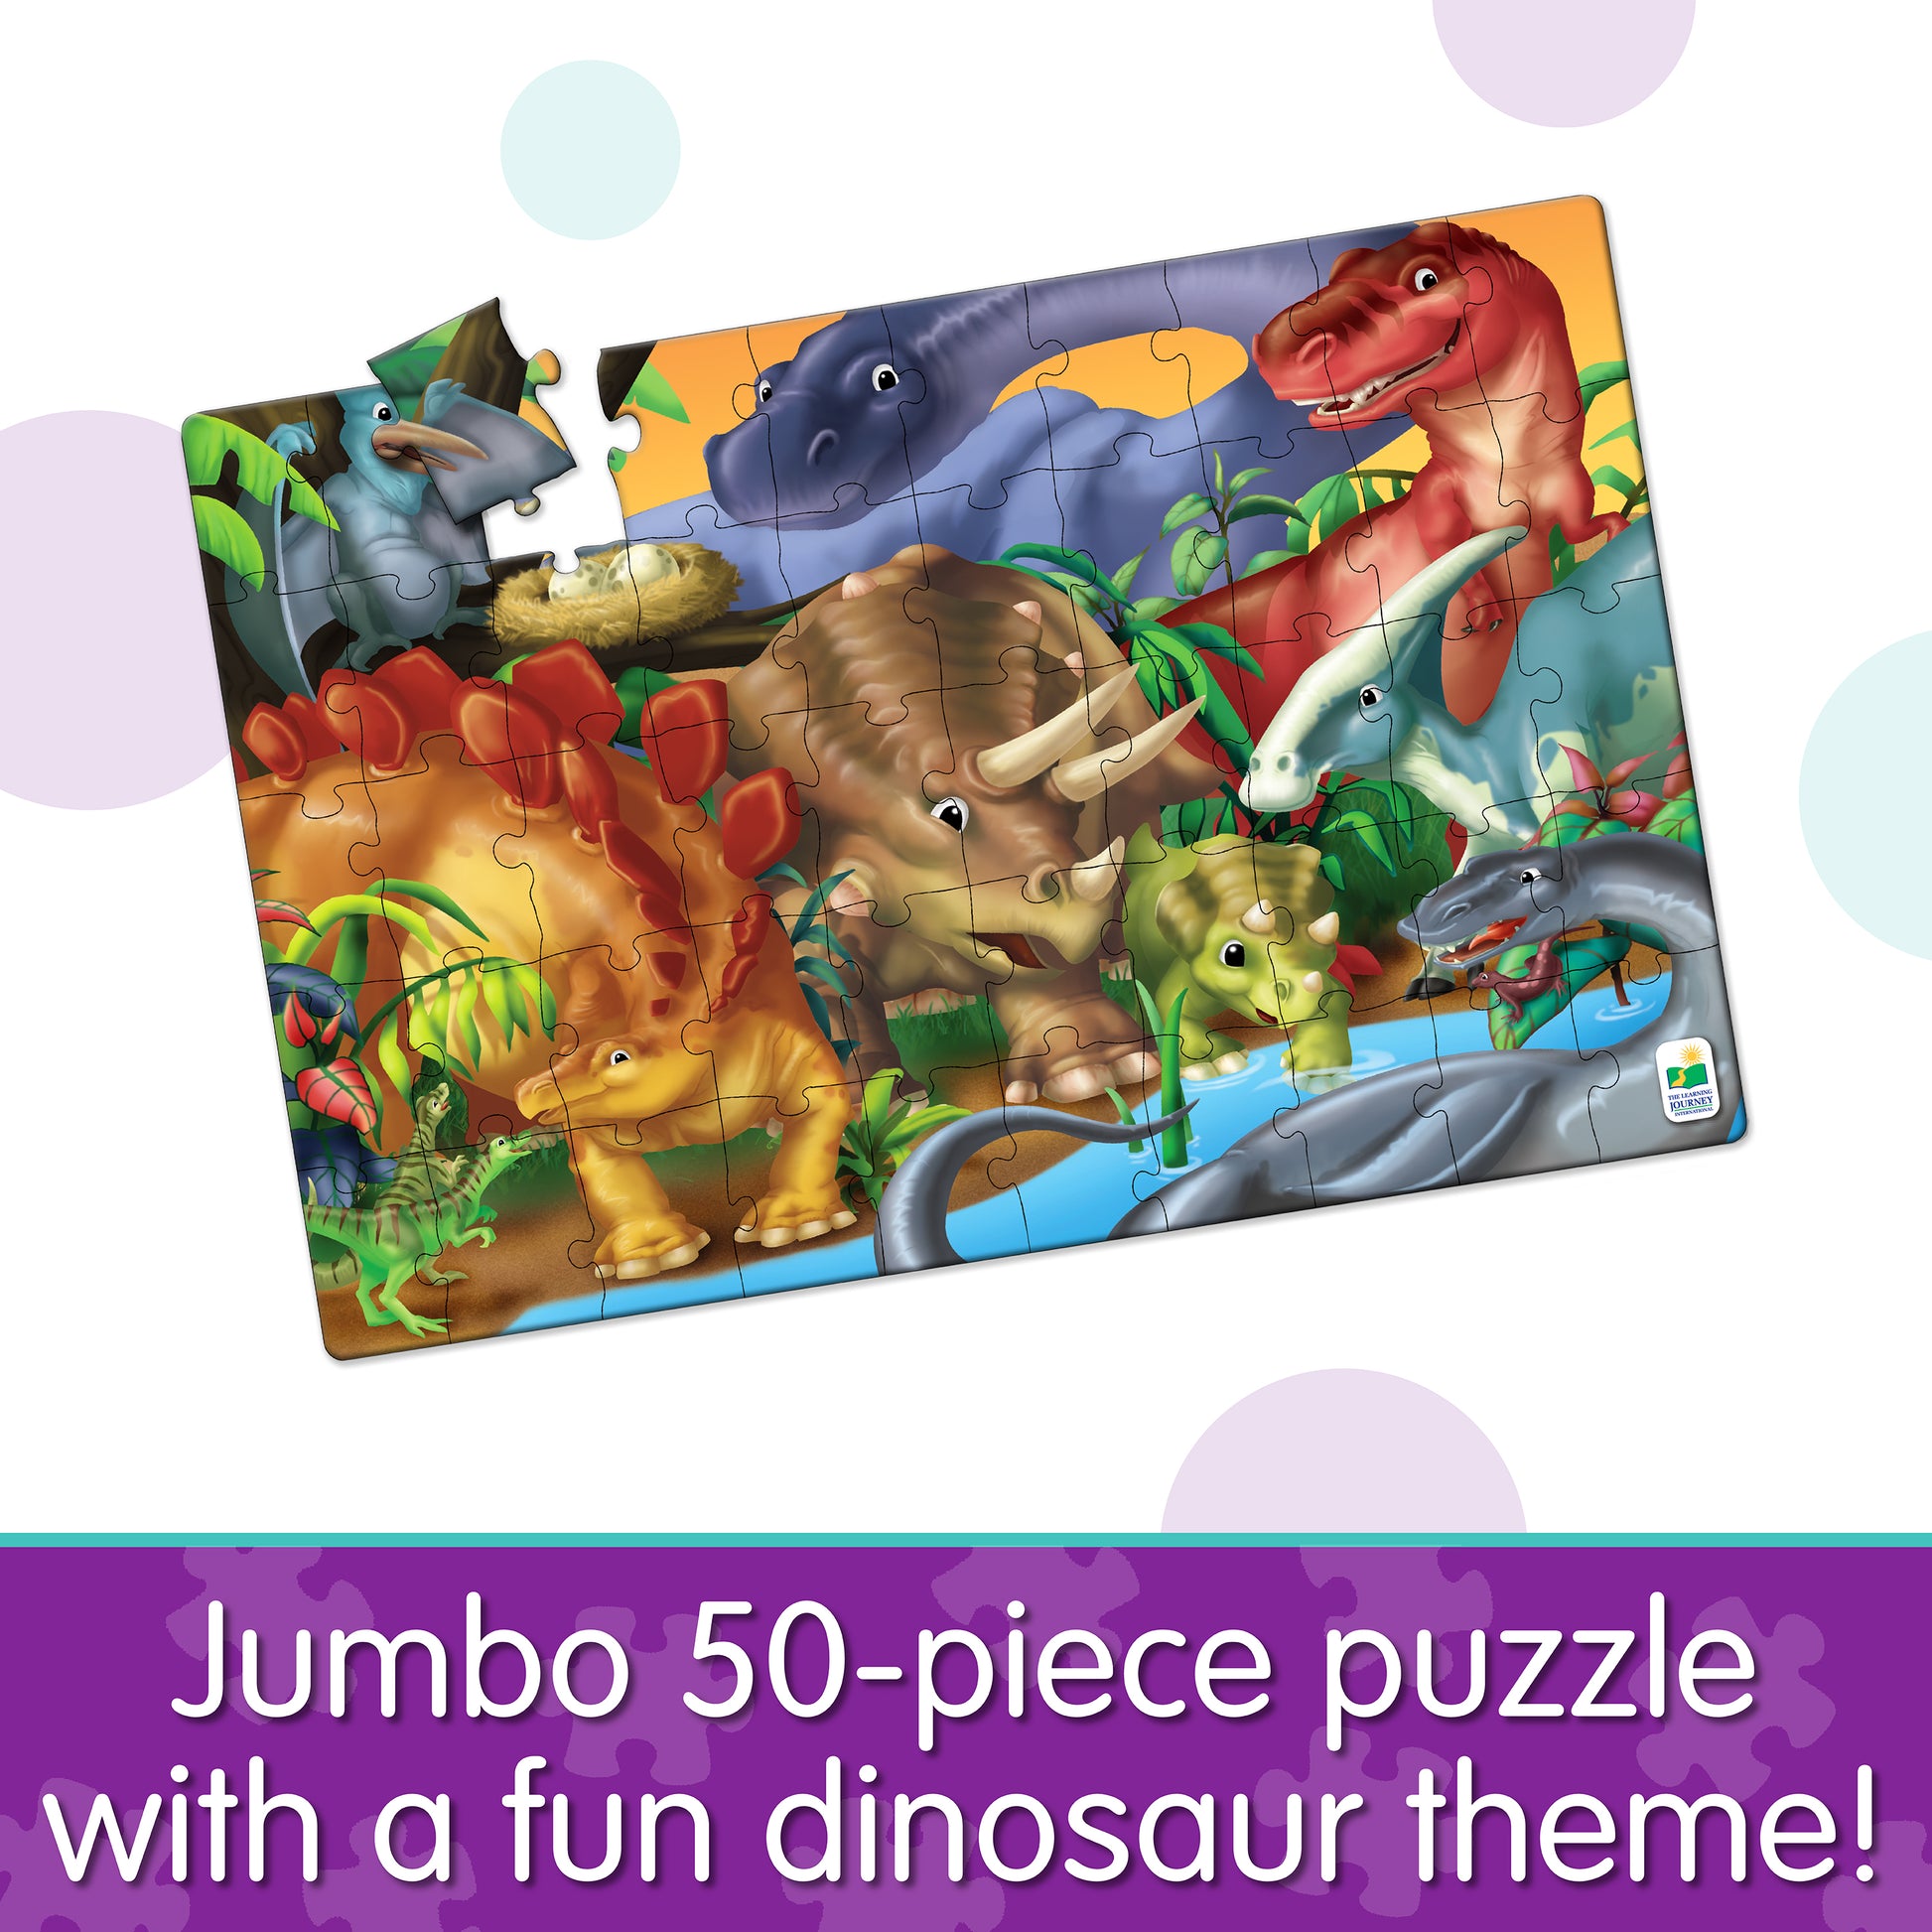 Infographic of Jumbo Floor Puzzle - Dinosaurs that reads, "Jumbo 50-piece puzzle with a fun dinosaur theme!"